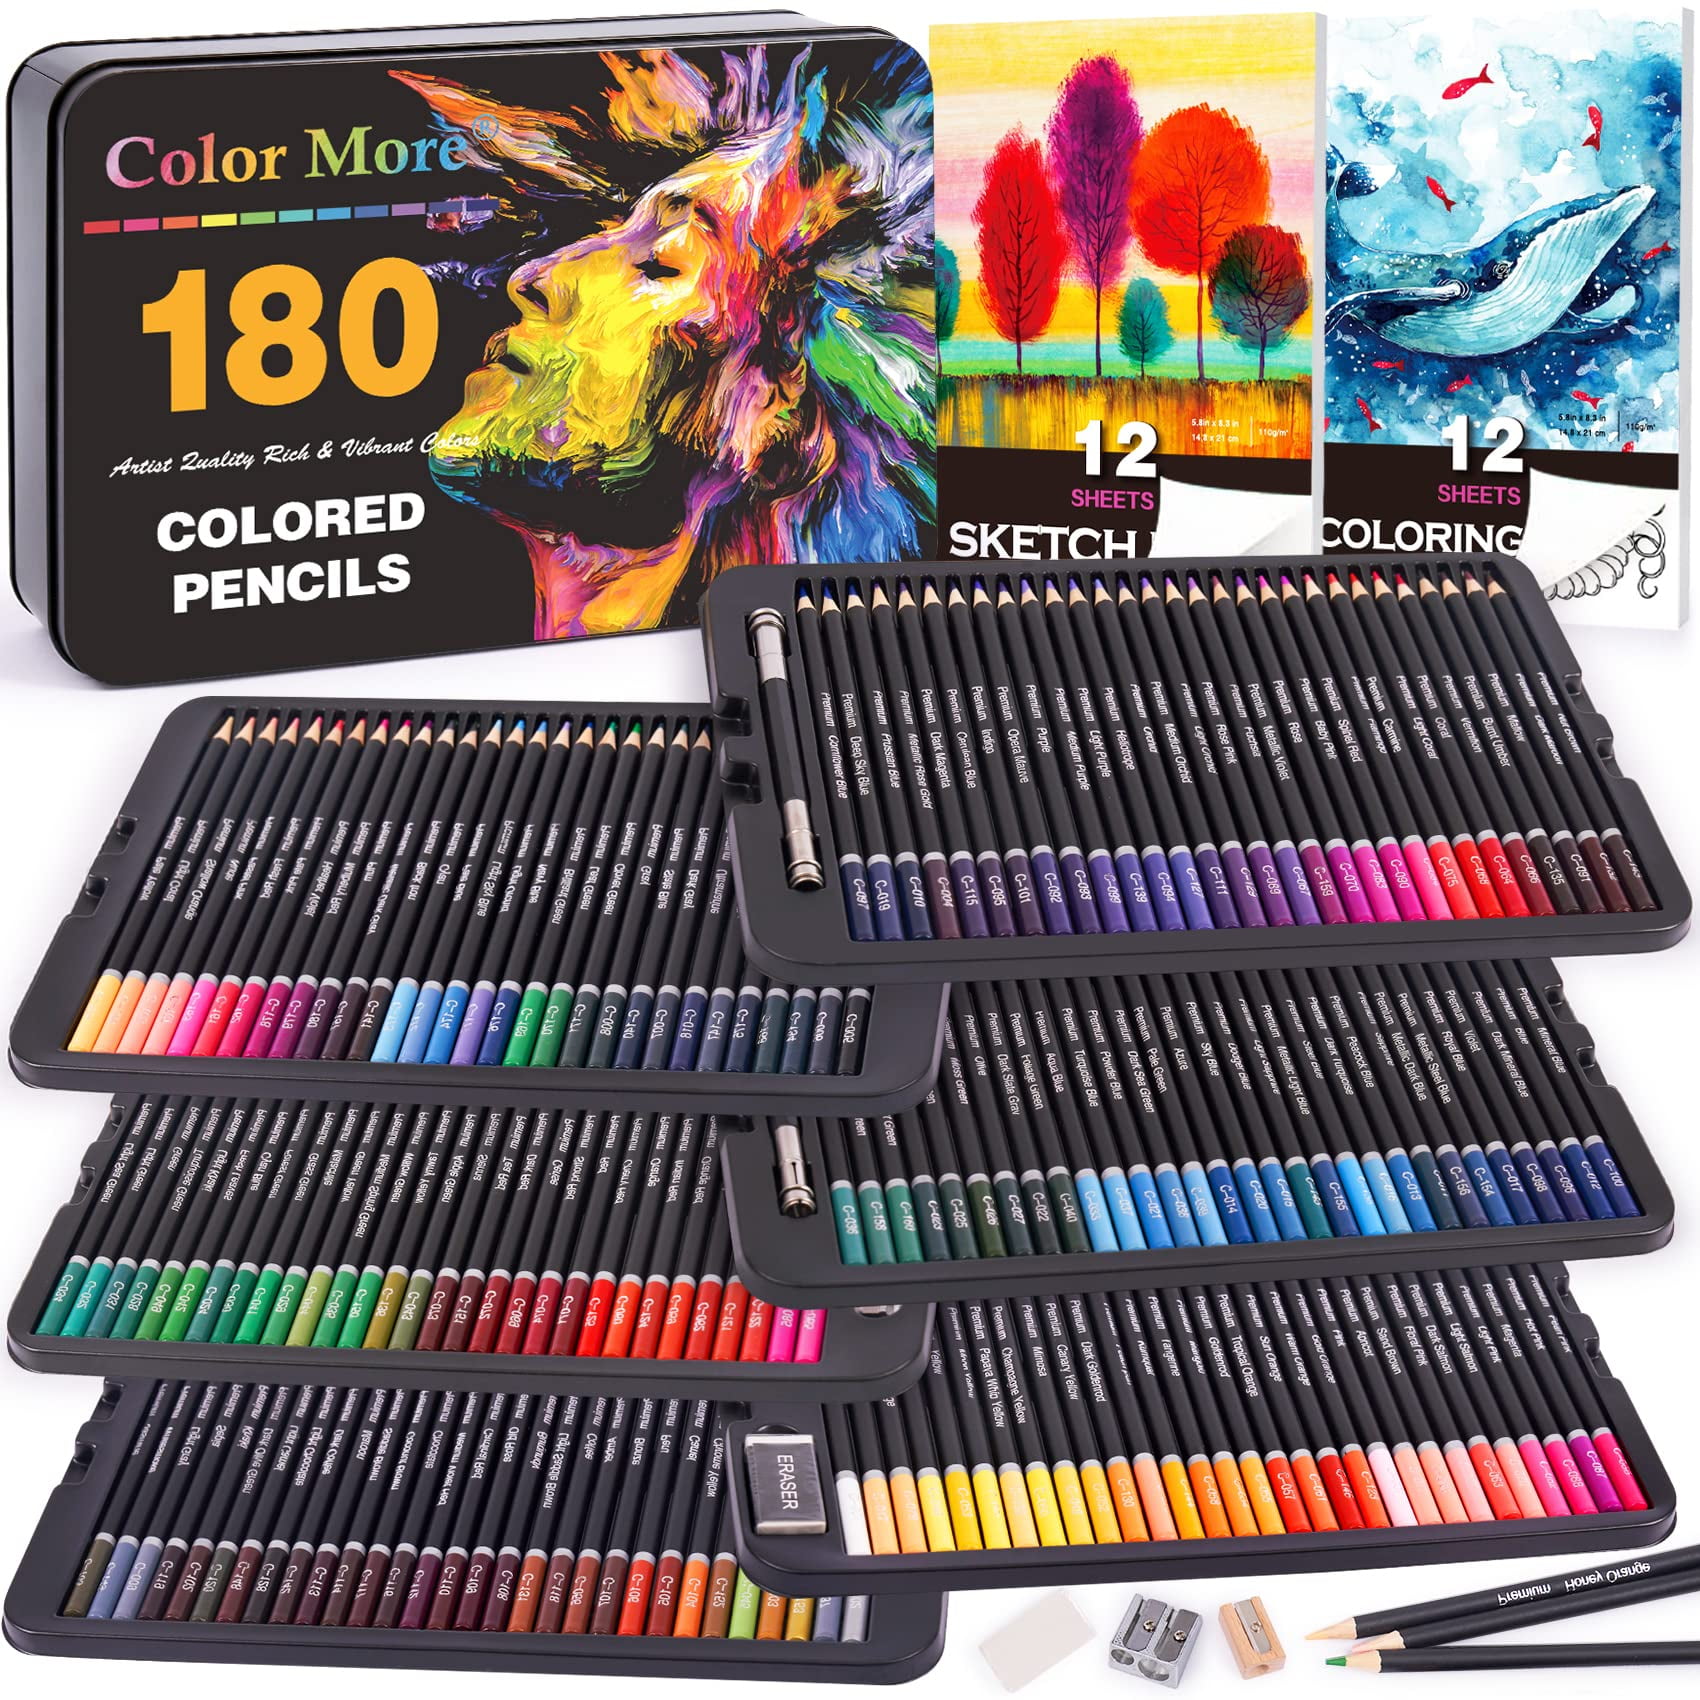  LEIGE 120/180/520 Colored Pencils Professional Set Soft  Wax-Based Core Drawing Art Sketching Shading & Coloring Tin Box (Color : A,  Size : 520 Colors)